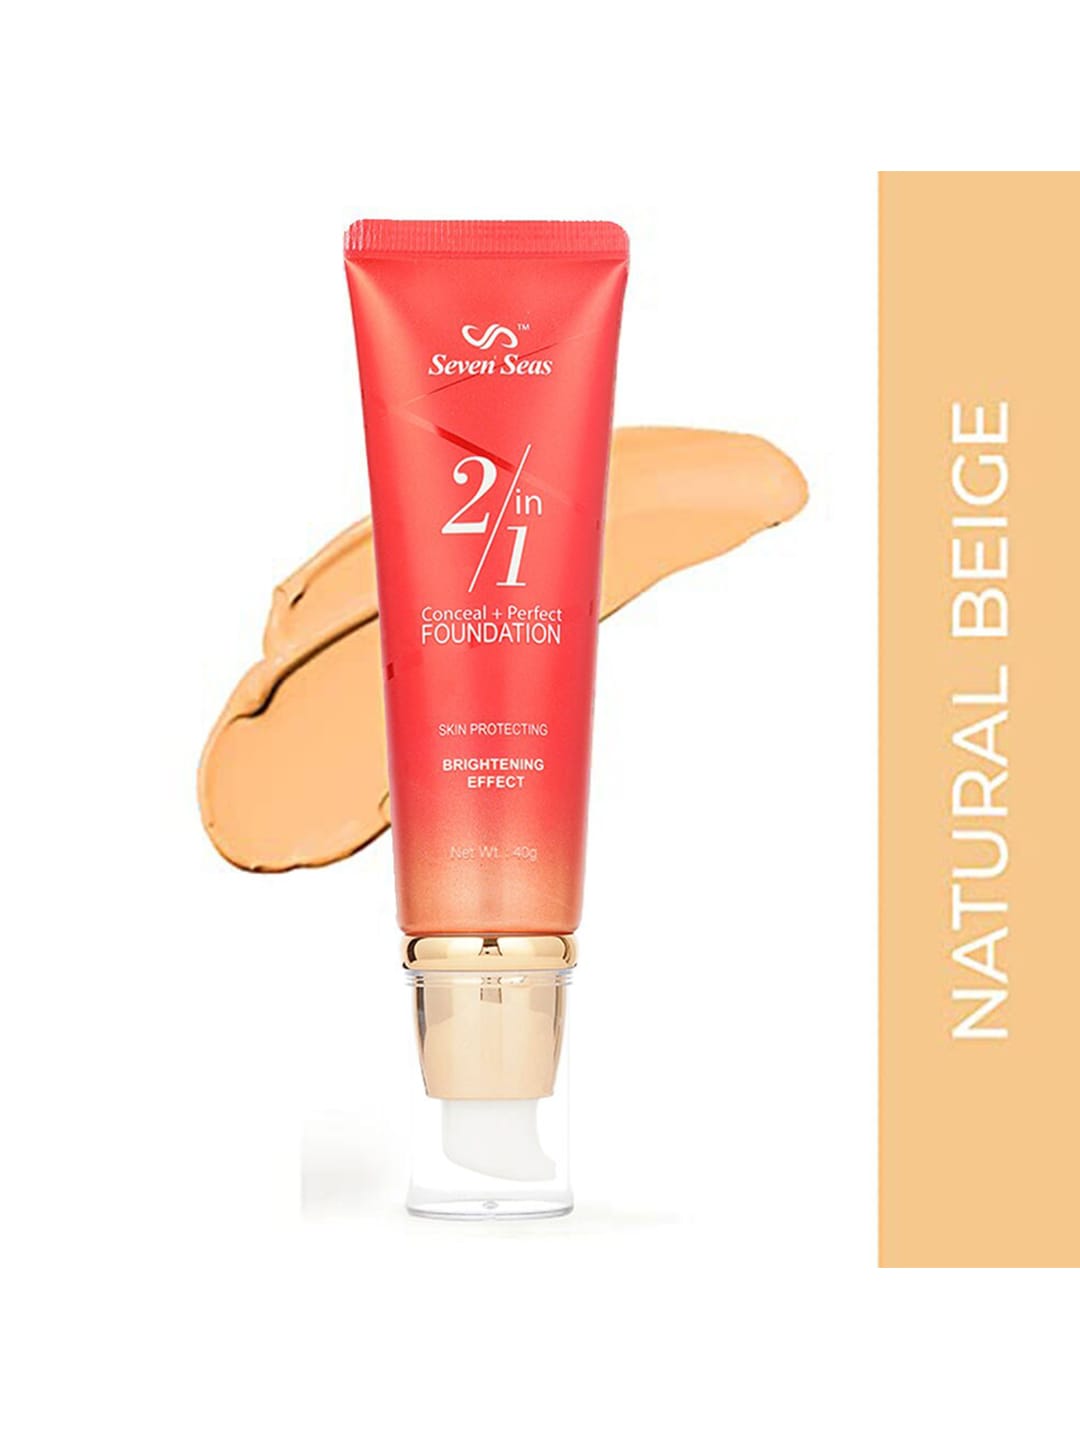 Seven Seas Skin Protecting Brightening 2 In 1 Concealer+Perfect Foundation - Natural Price in India